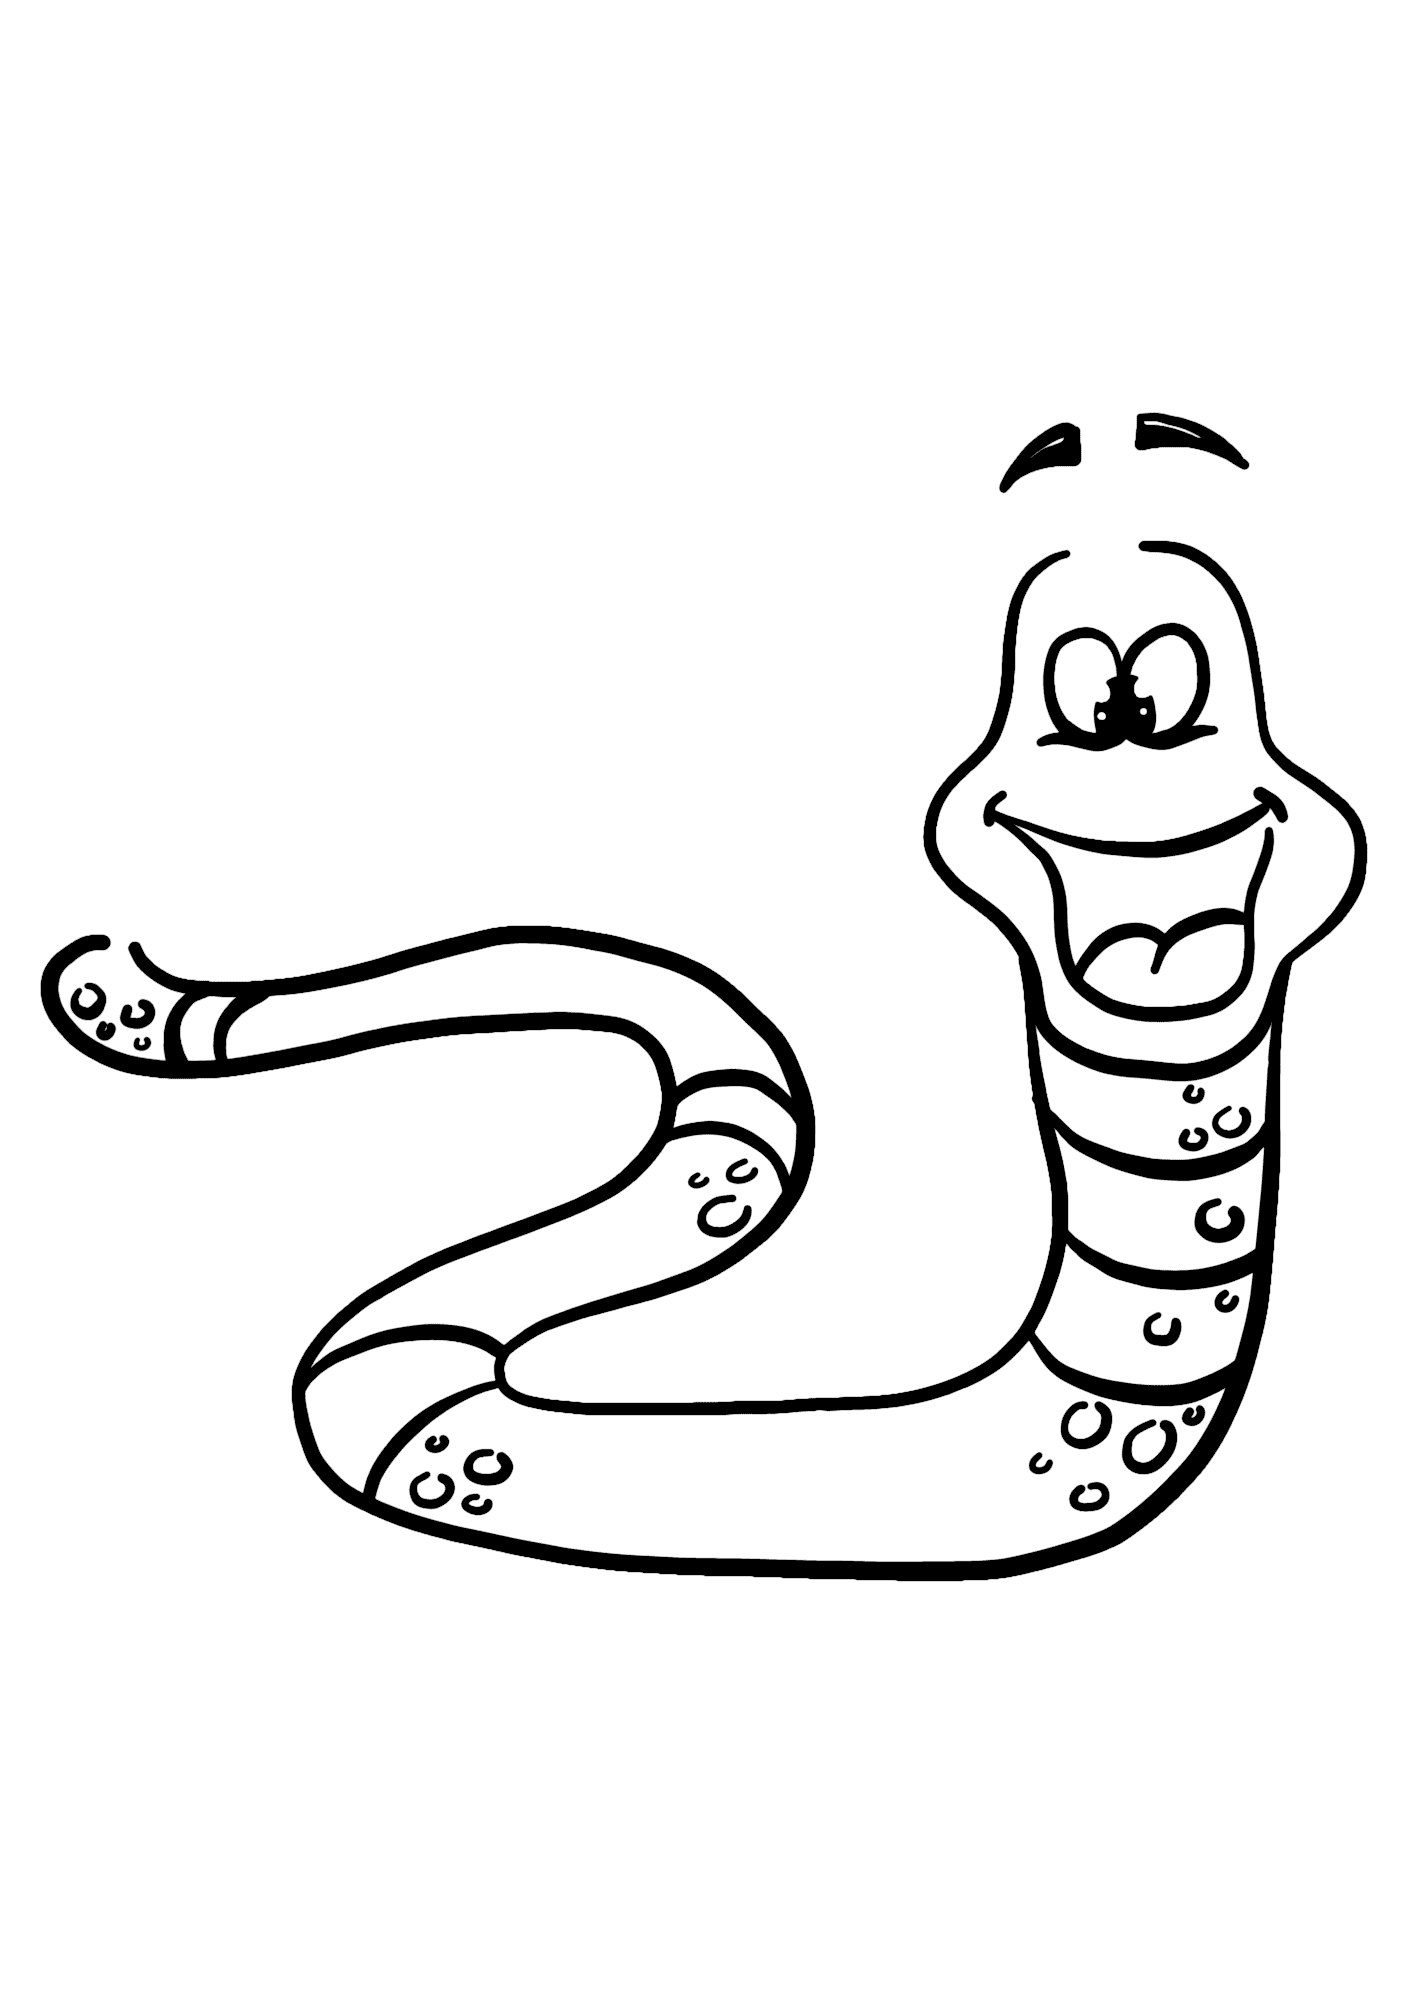 Earthworm For Children Image Picture